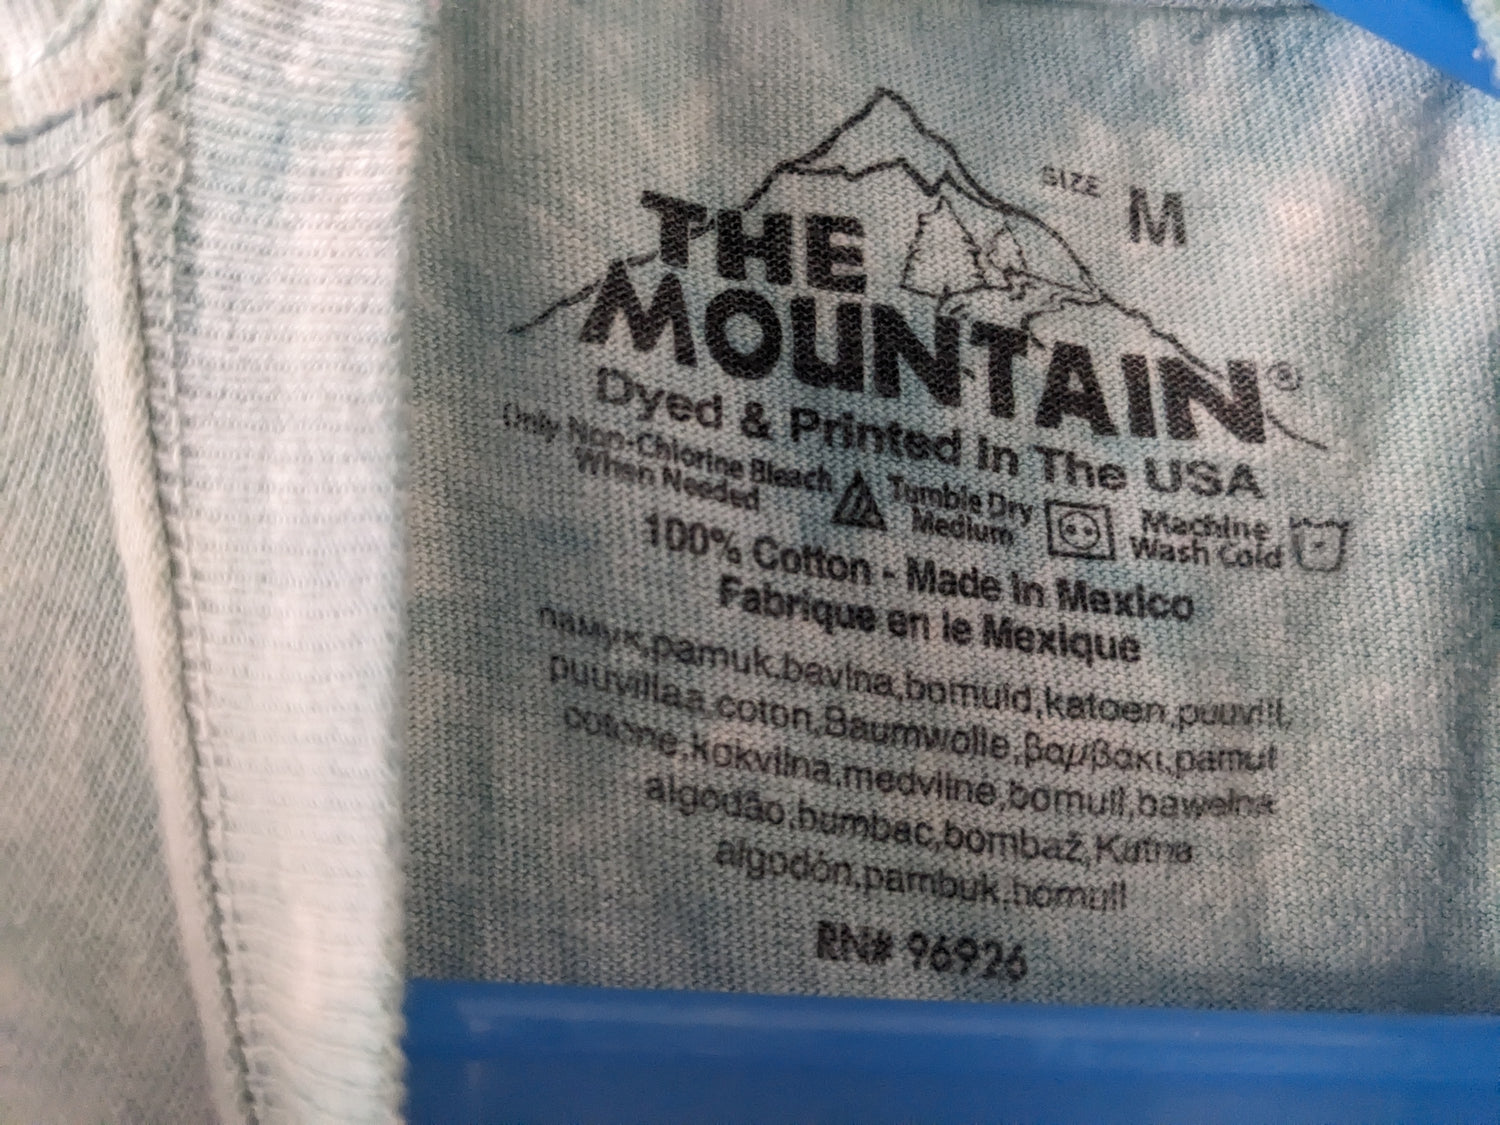 Otters on Mountain kids shirt tag details